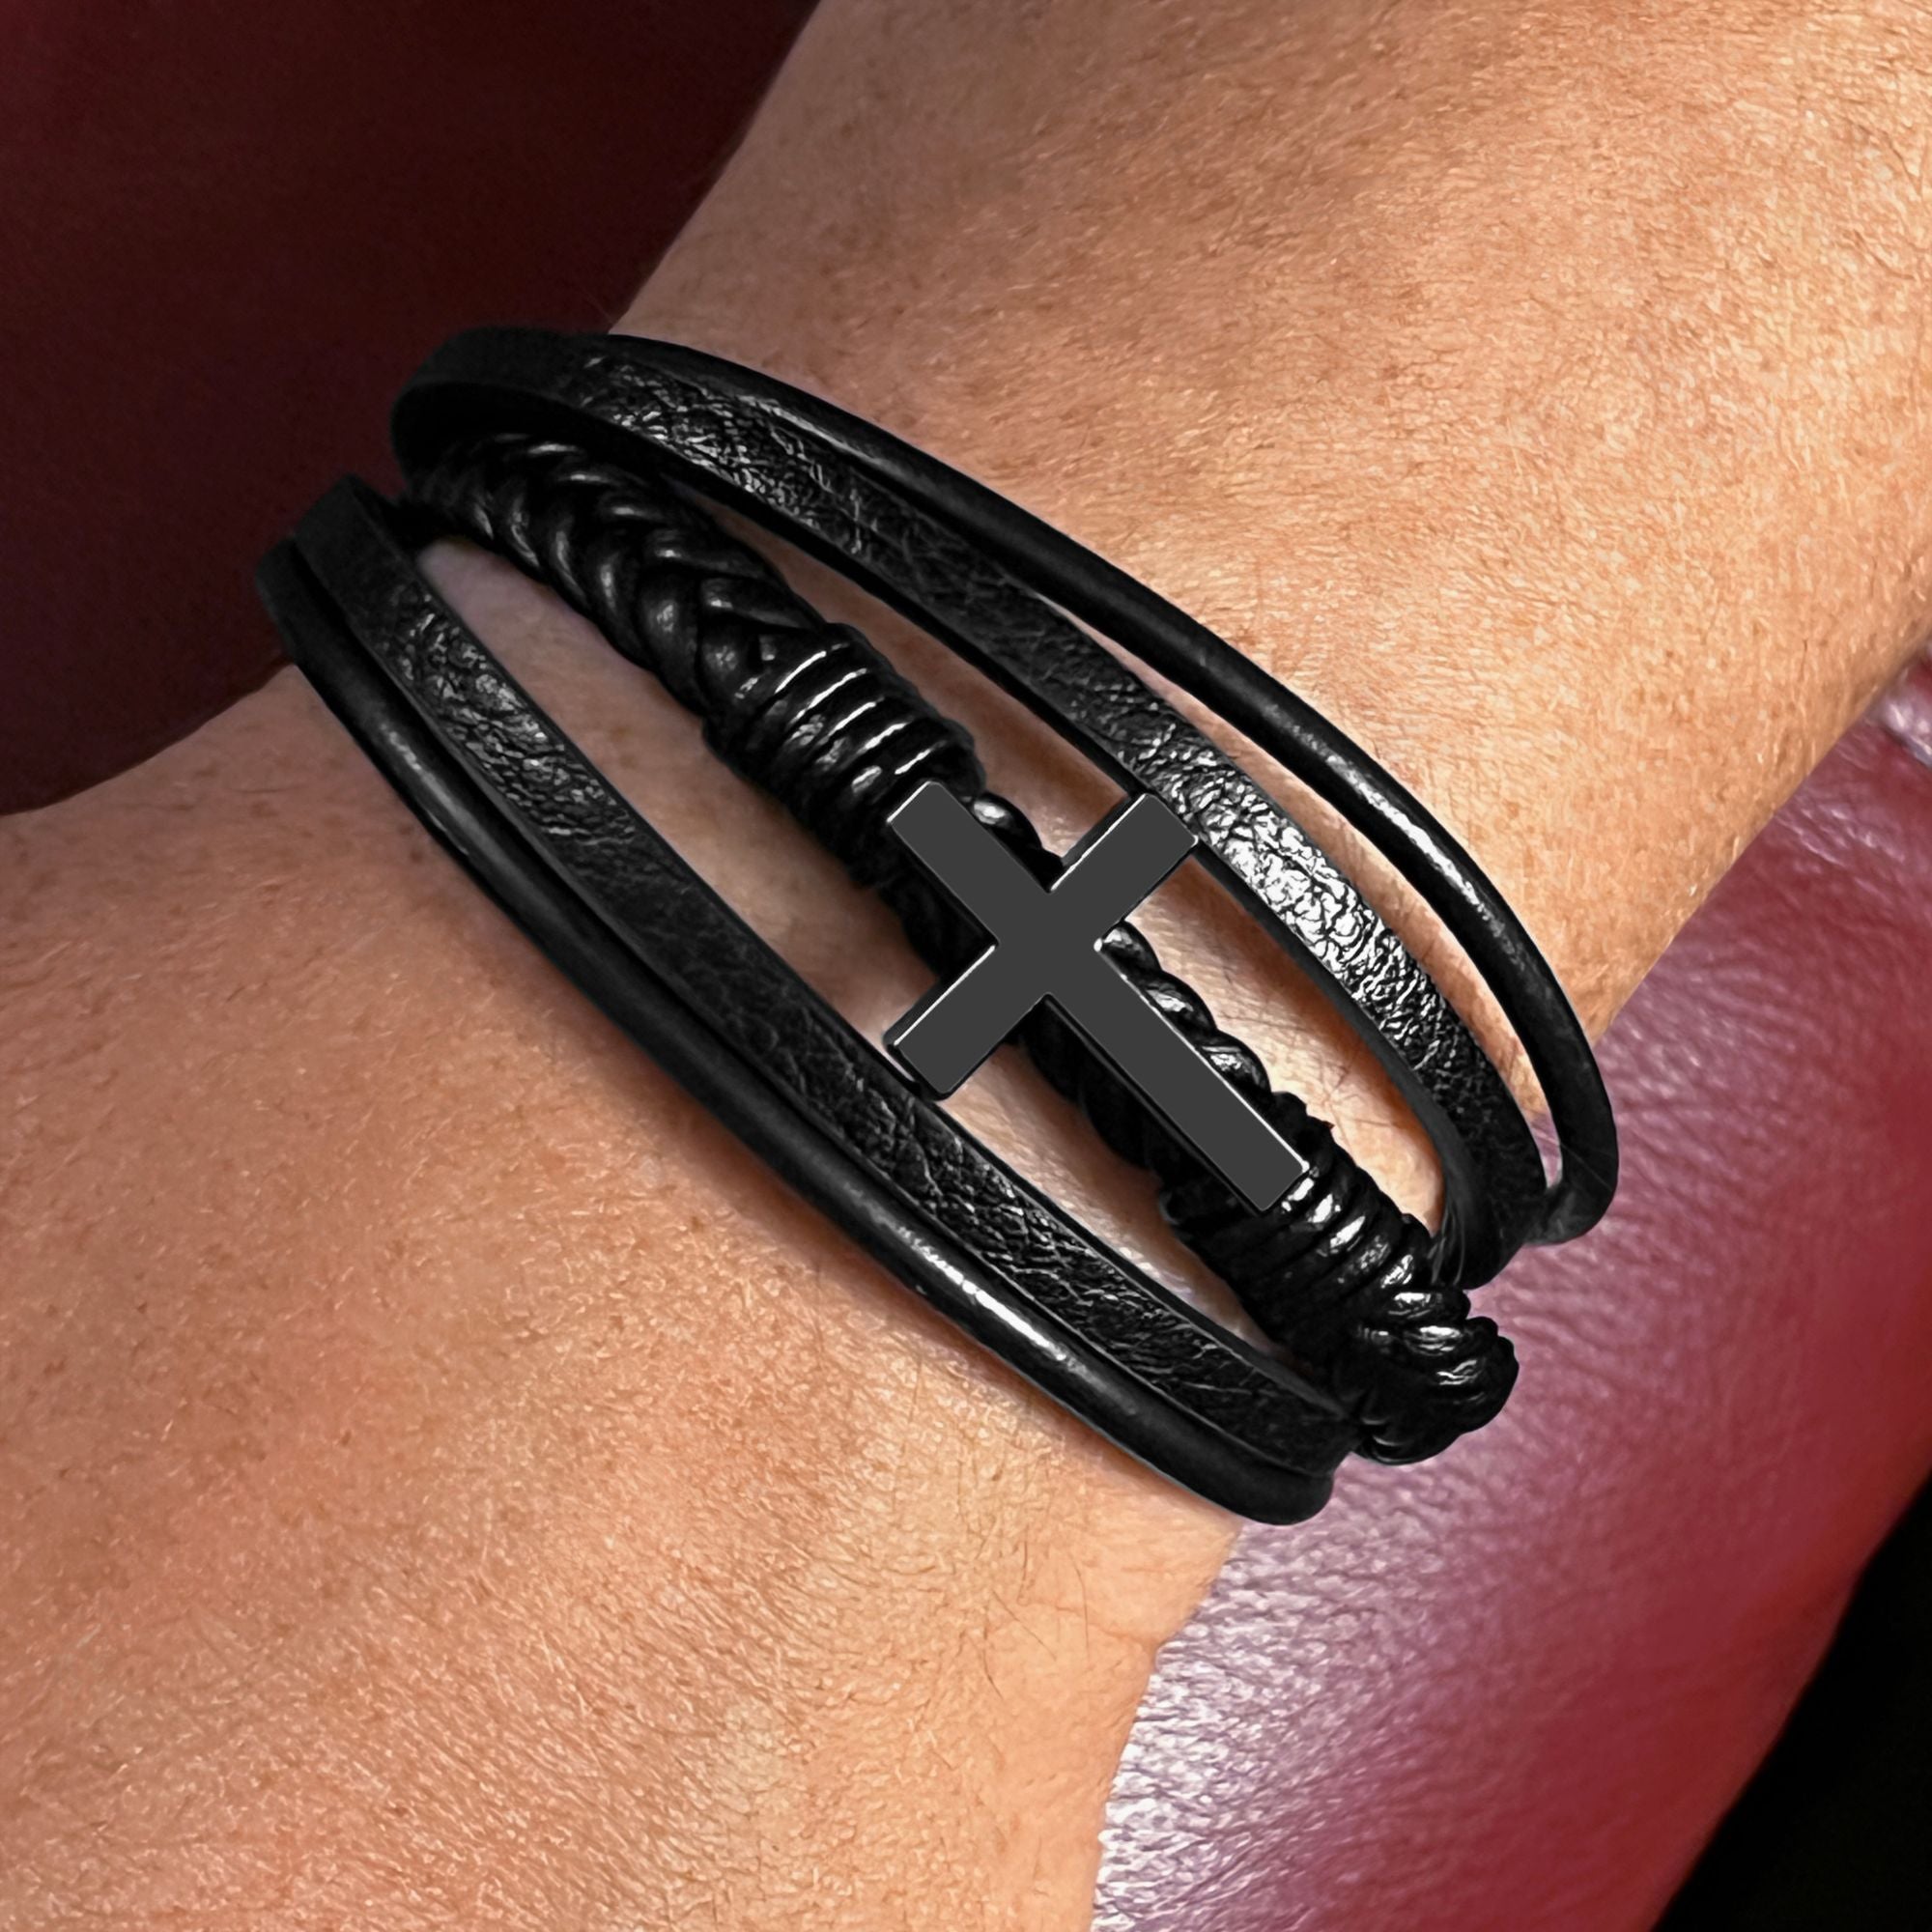 May Your Troubles Be Less - Saint Patrick's Day Gift - Men's Cross and Black Braided Rope Bracelet Jesus Passion Apparel